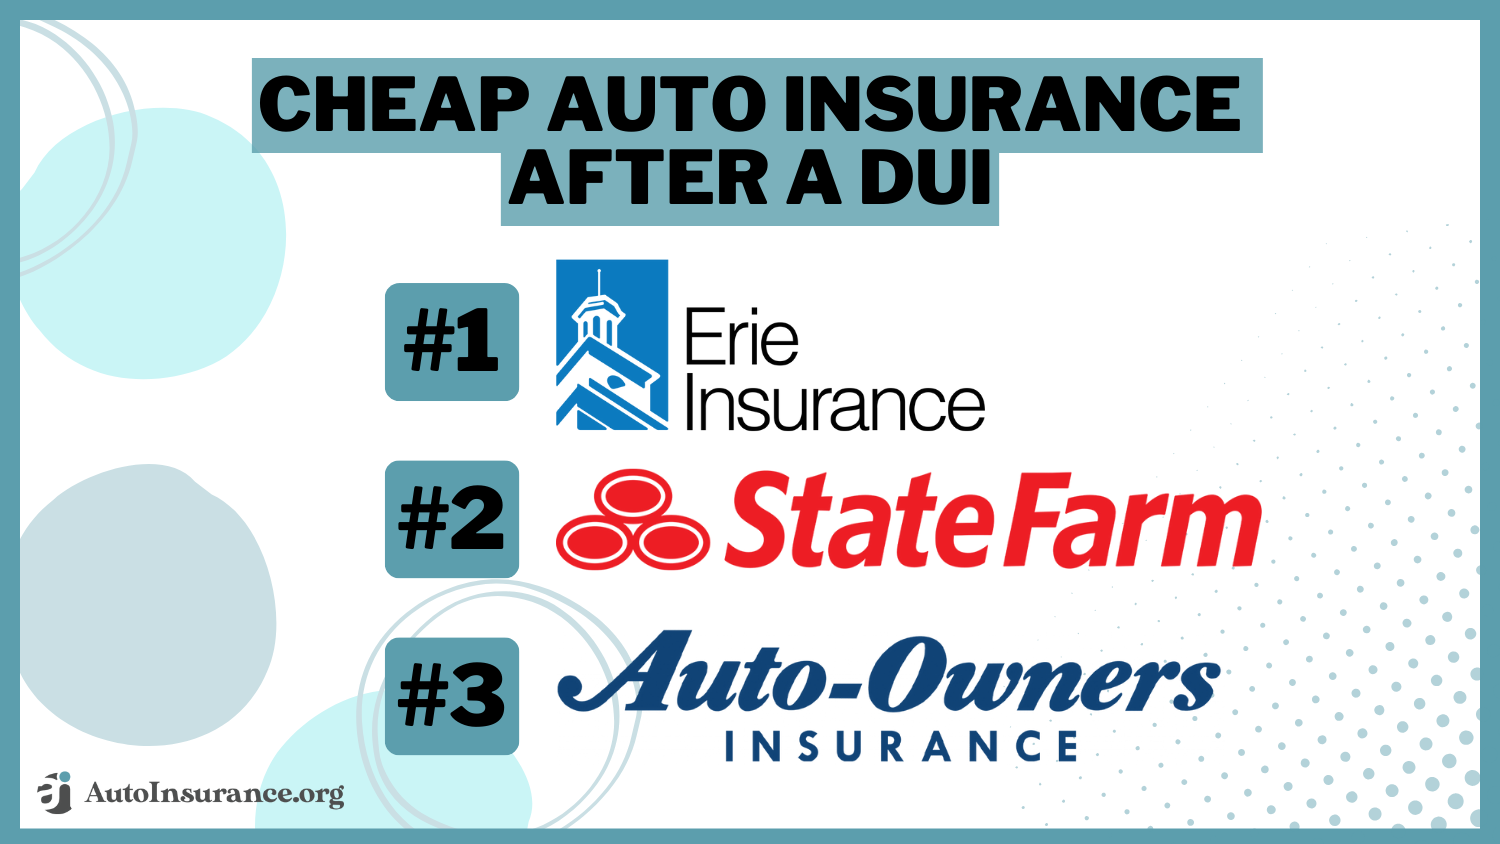 Erie state farm auto-owners Cheap Auto Insurance After A DUI